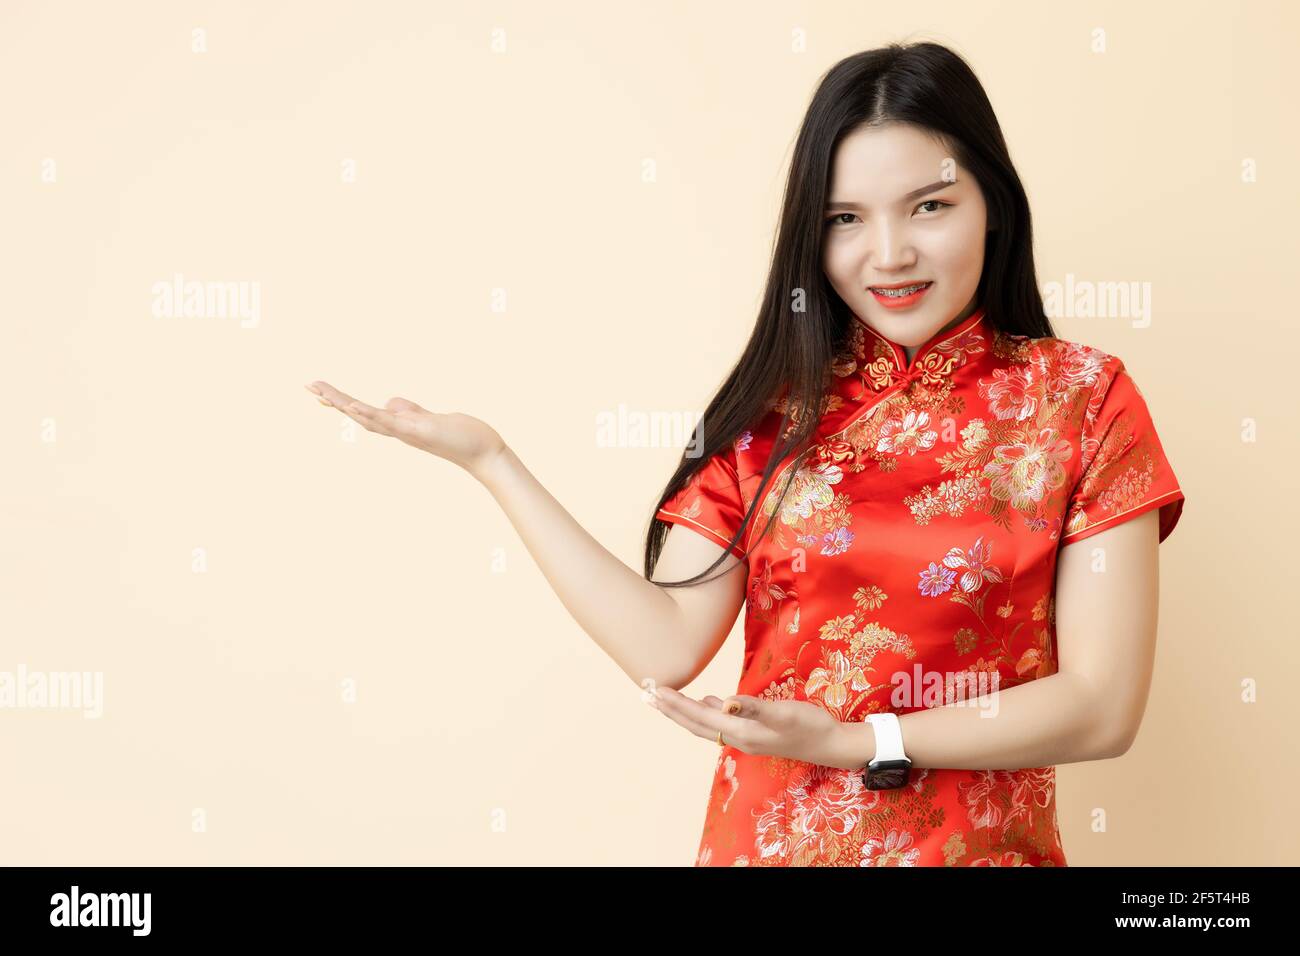 Asian Chinese teen girl hand show display presentation sale promotion posture dressing Qipao traditional cloth. Stock Photo